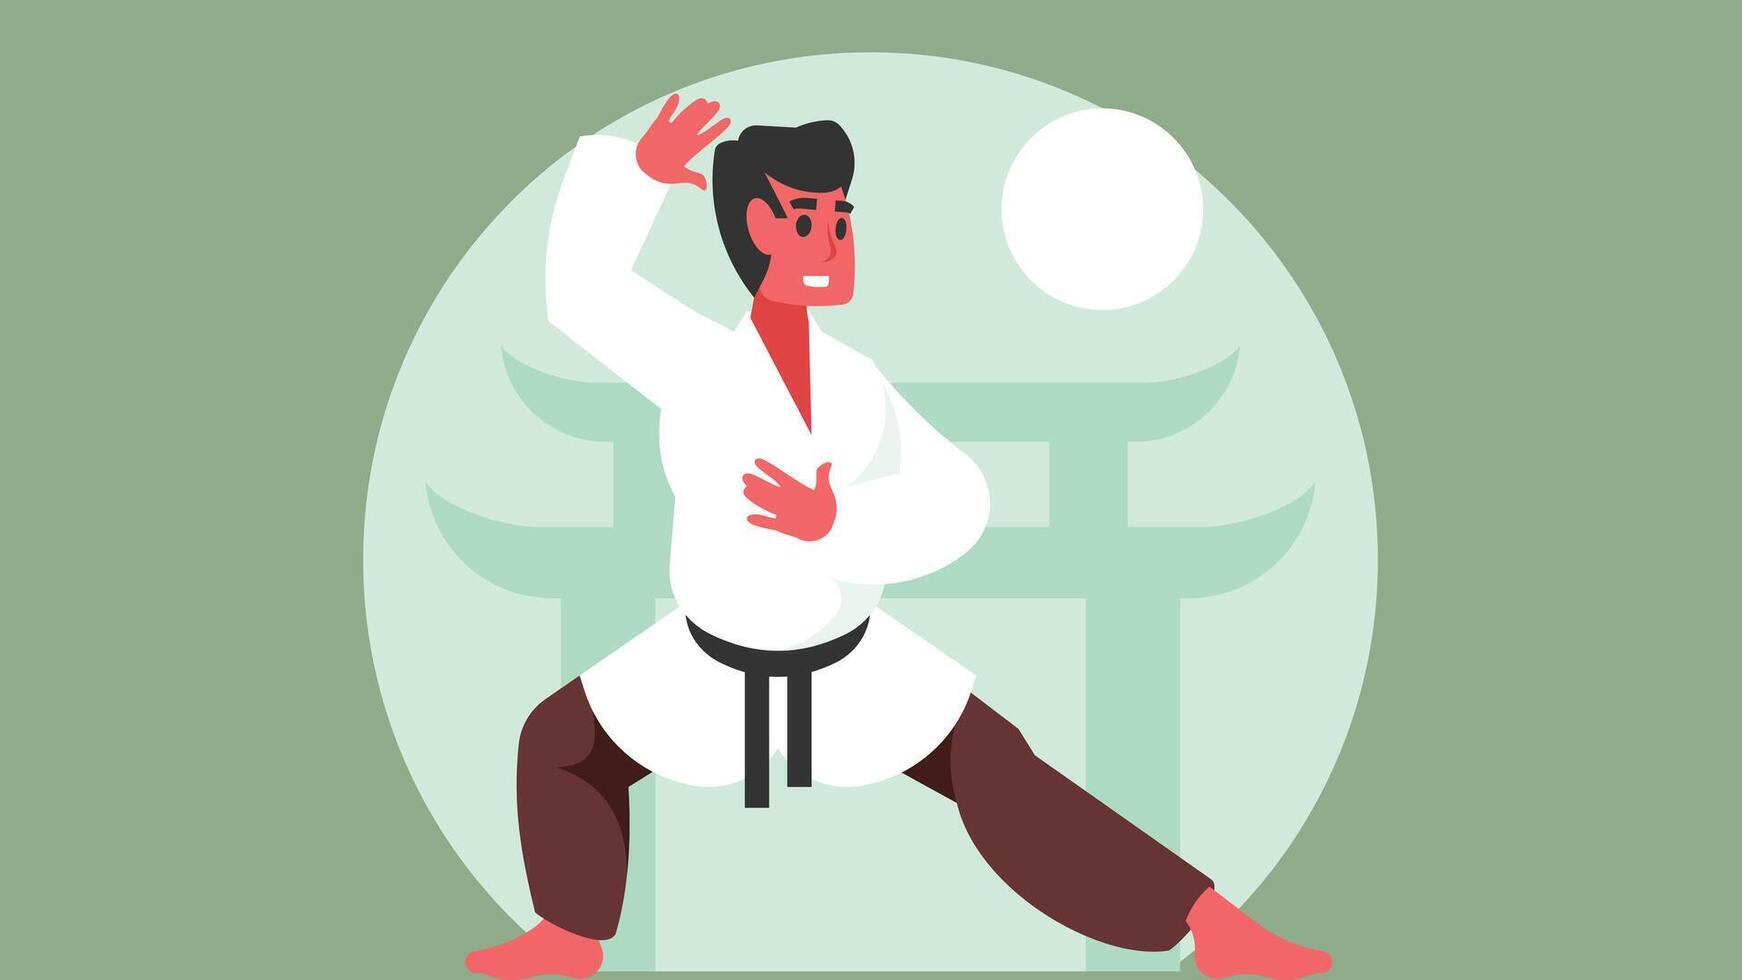 Karate player in a final competition for the medal flat illustration vector